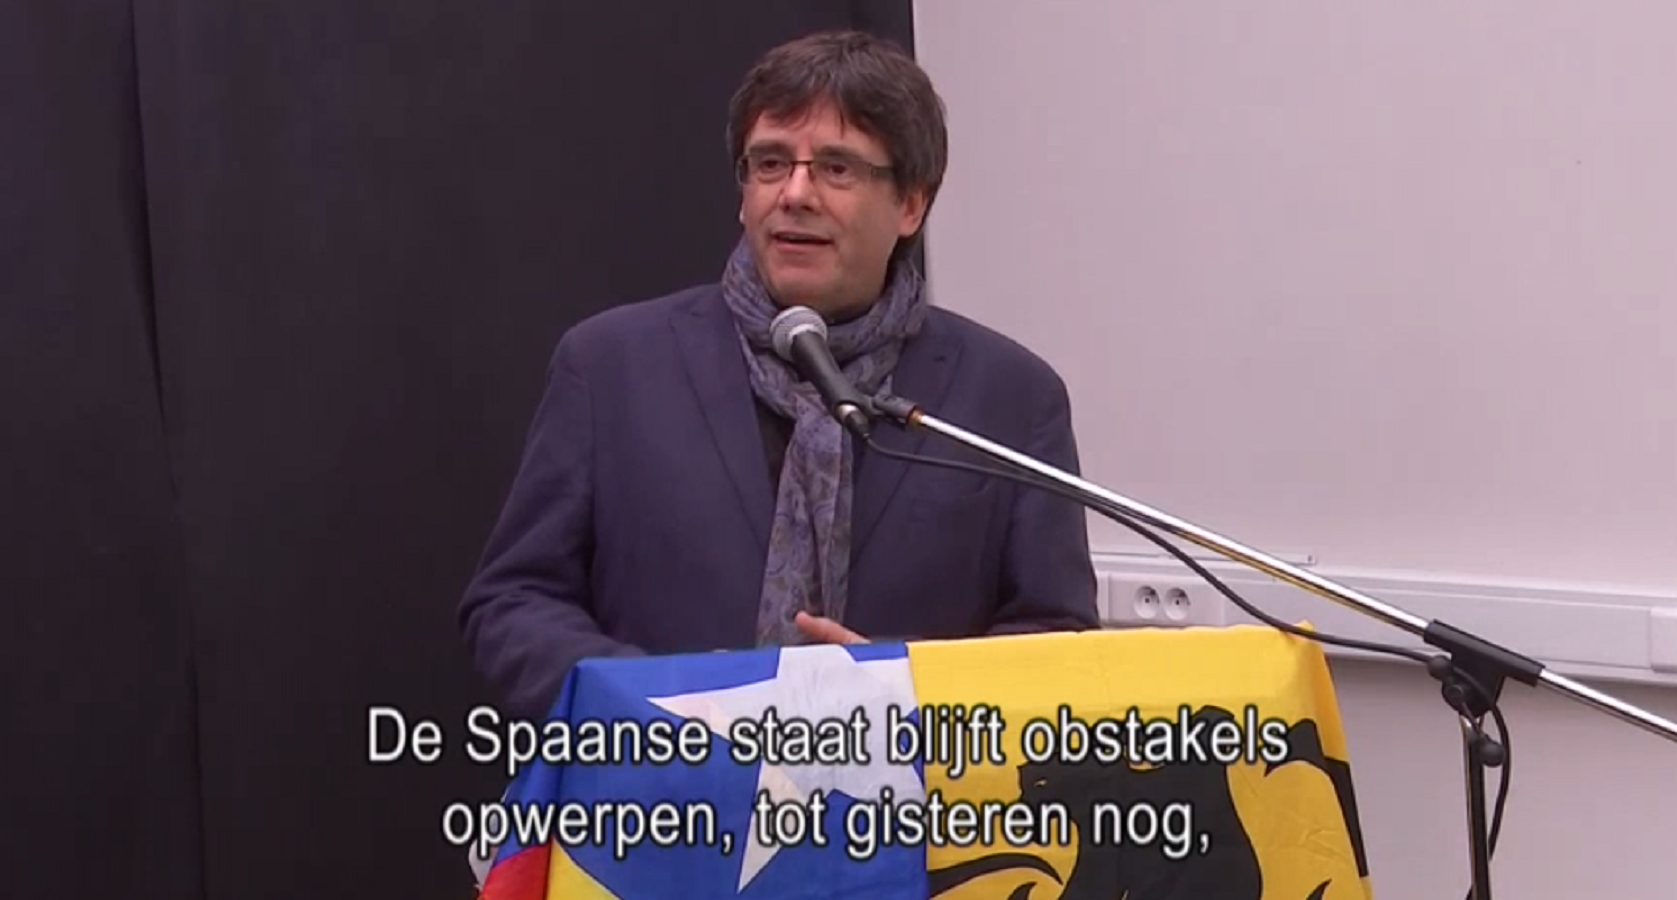 Puigdemont, in Flanders: "Spain is trying to ignore the Catalan election results"